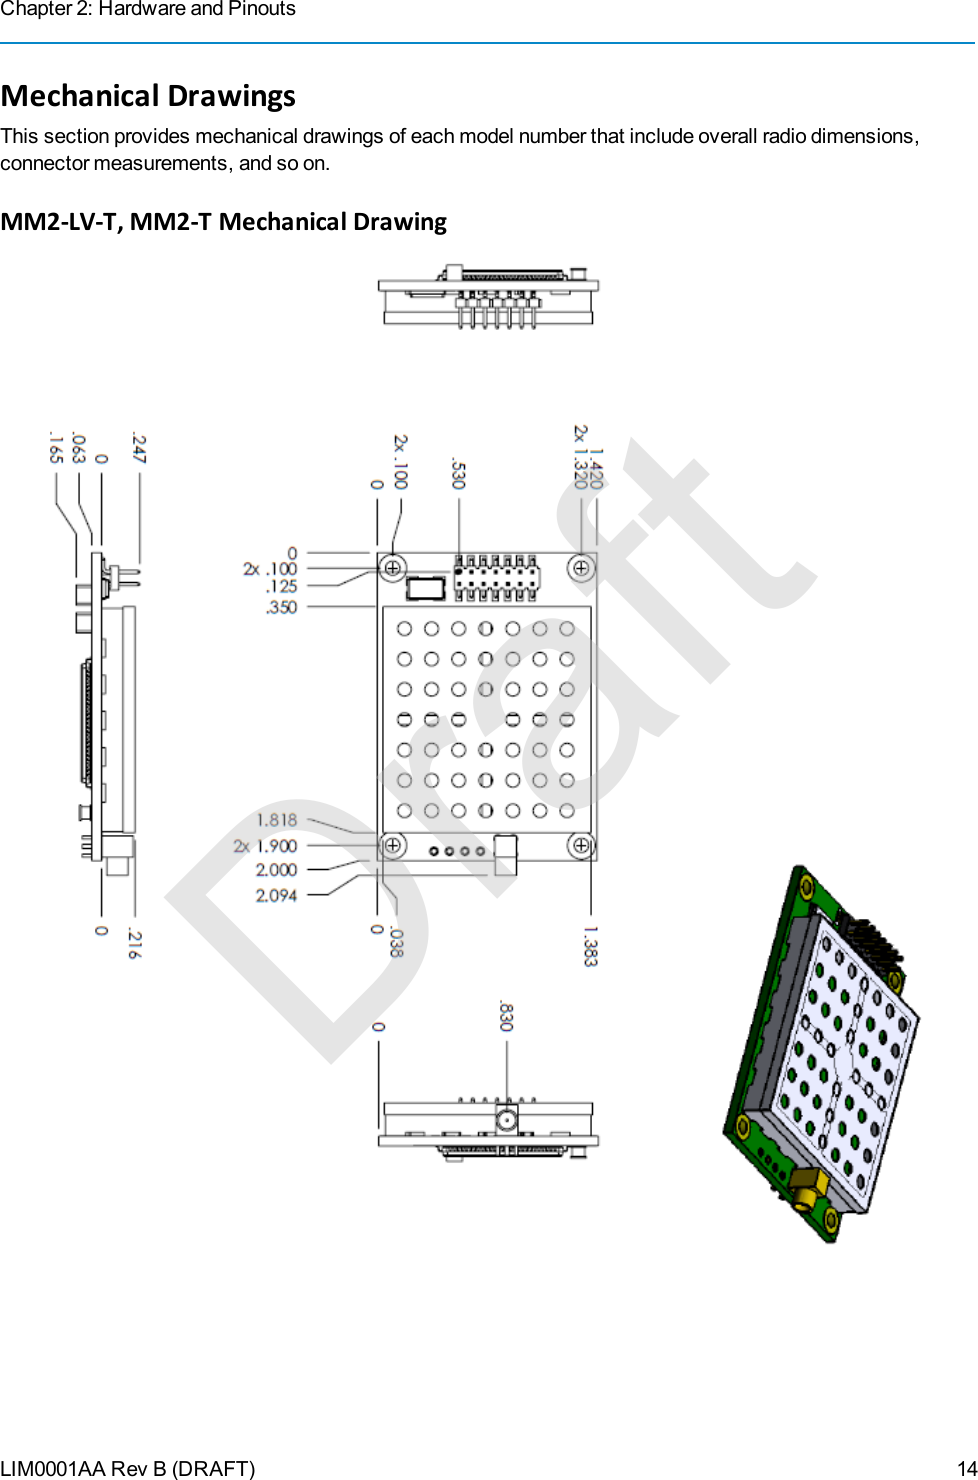 Chapter 2: Hardware and PinoutsLIM0001AA Rev B (DRAFT)Mechanical DrawingsThis section provides mechanical drawings of each model number that include overall radio dimensions,connector measurements, and so on.MM2-LV-T, MM2-T Mechanical Drawing14Draft